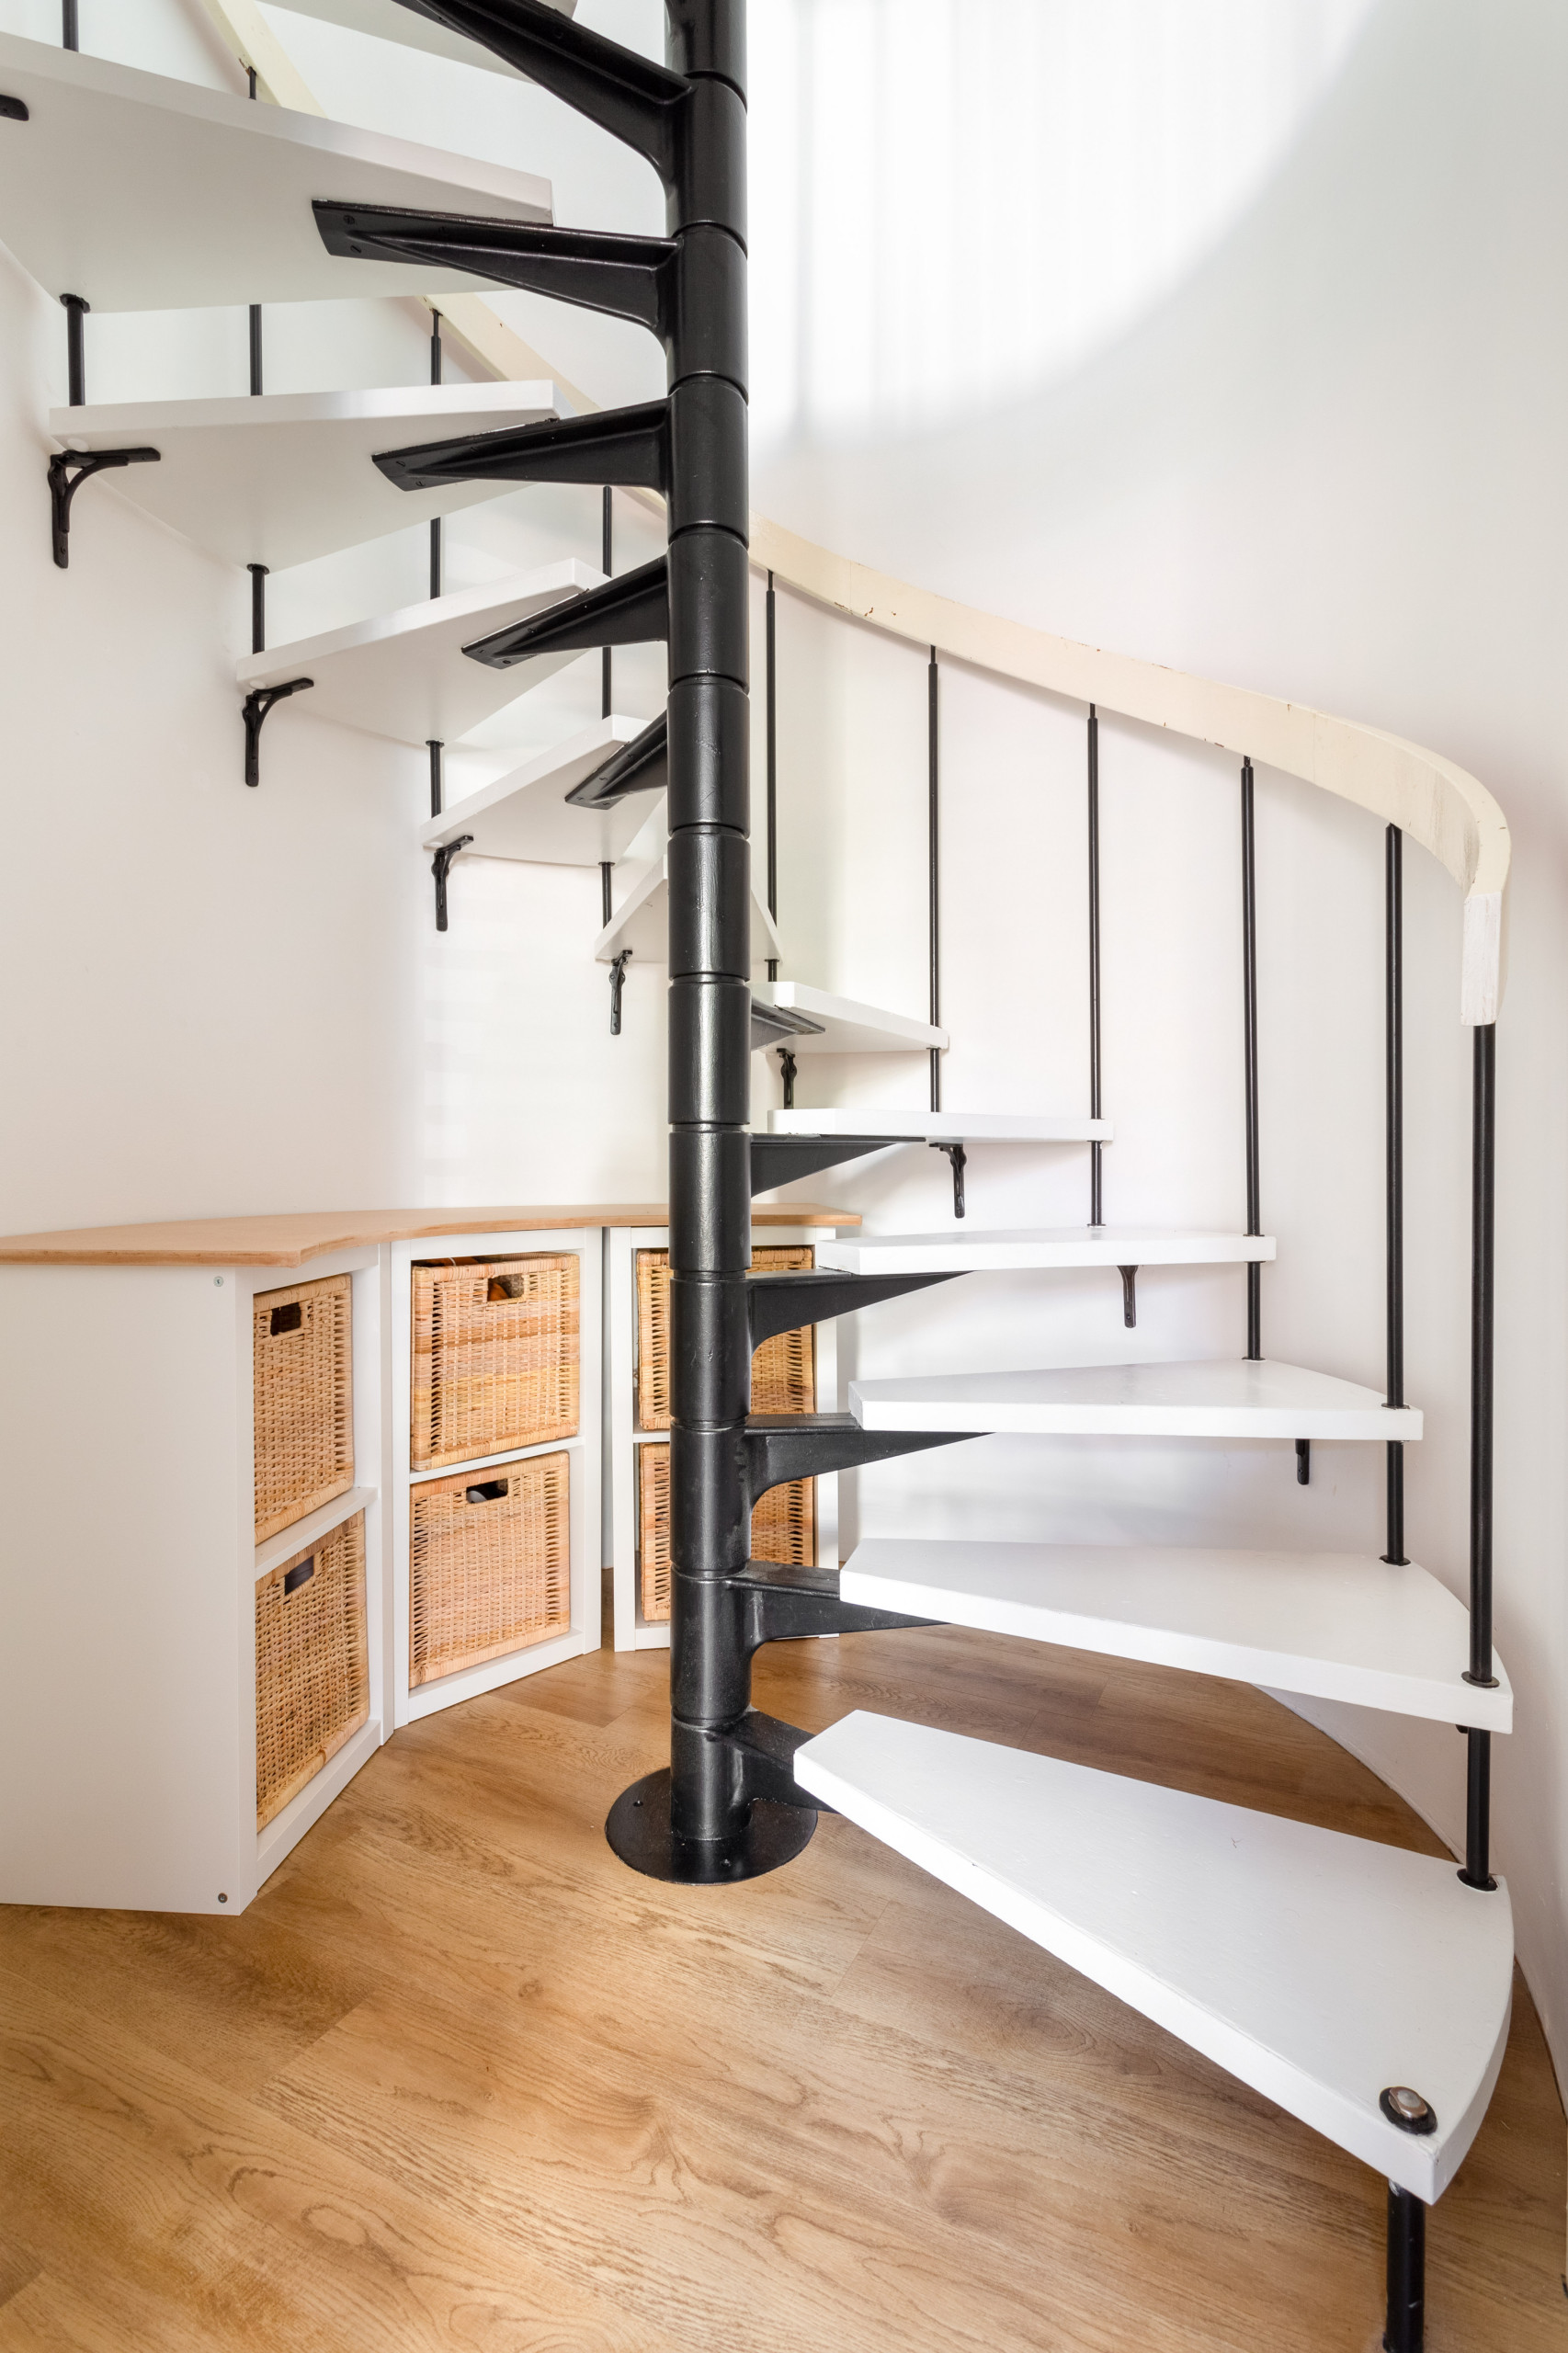 Spiral staircase and storage